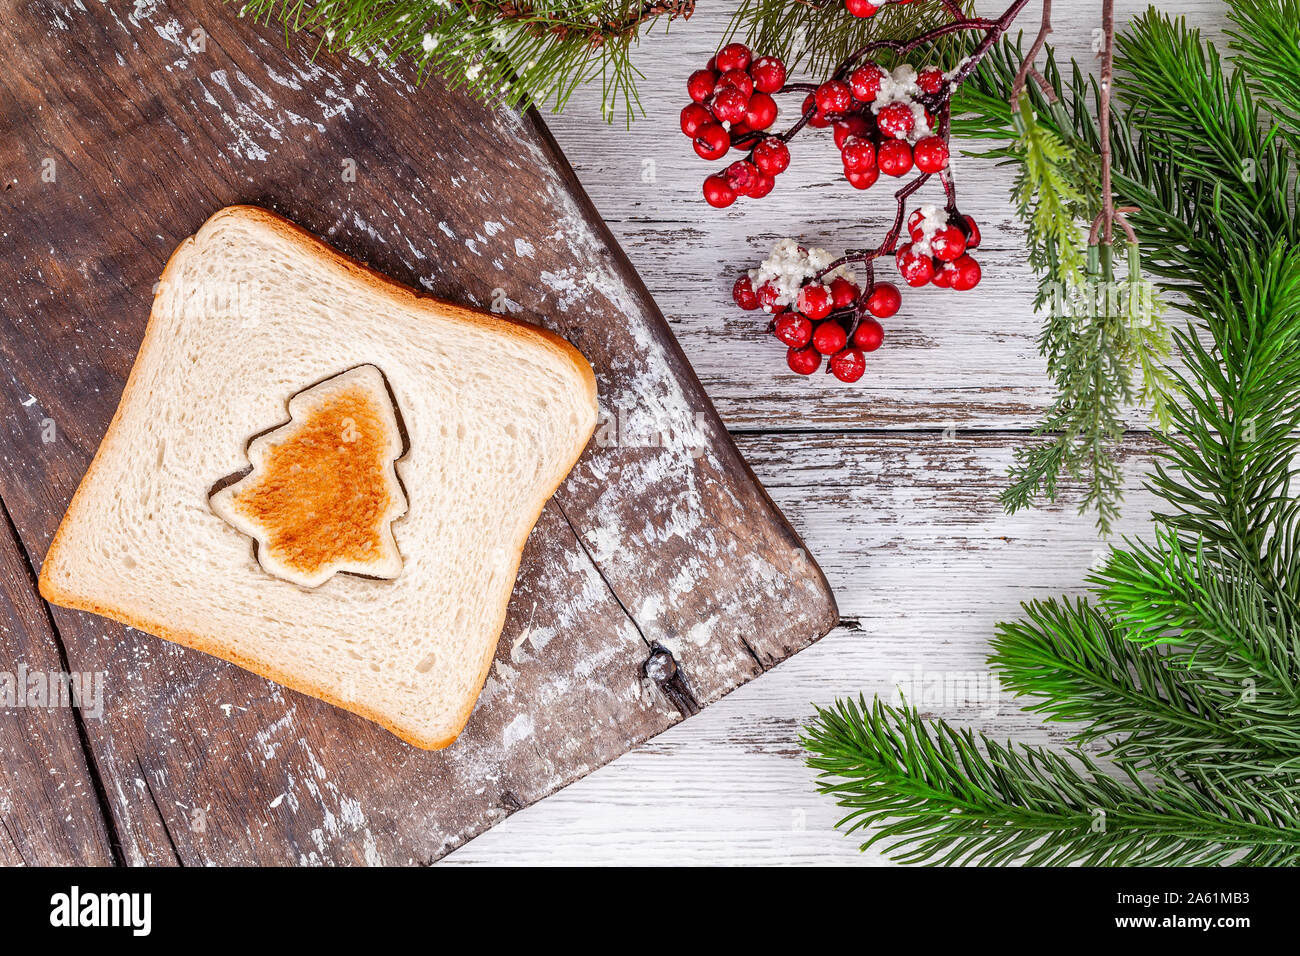 Toasted bread shaped like a fir tree on vintage rustic wooden cutting board  Stock Photo - Alamy